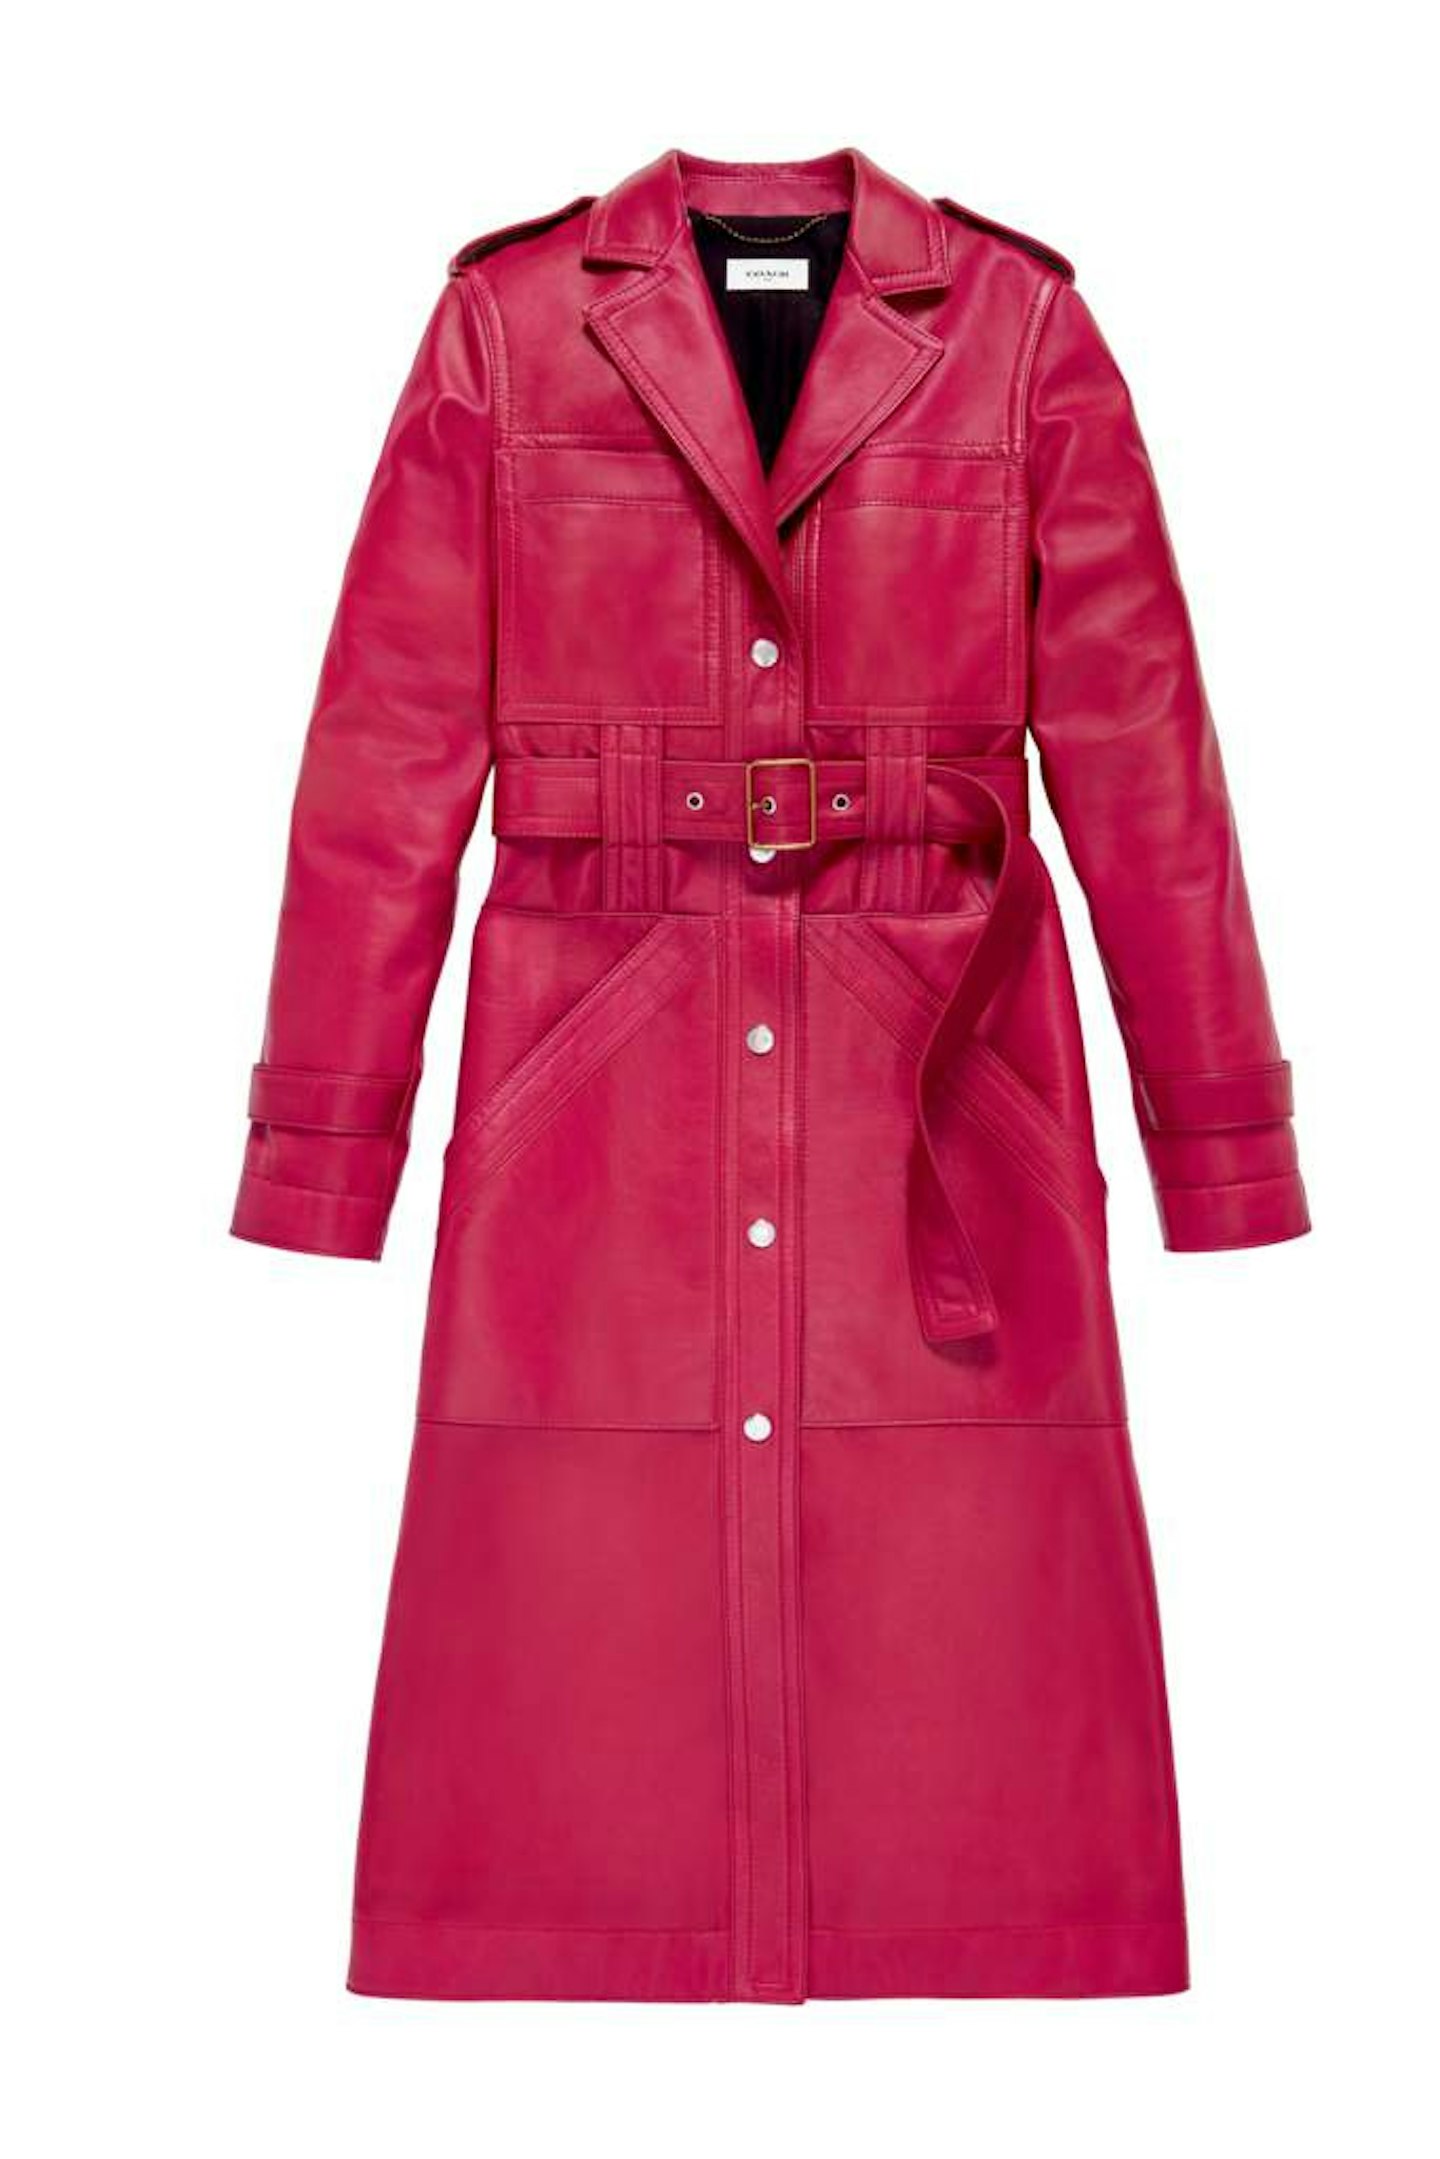 Coach, Leather Trench Coat, £1,250